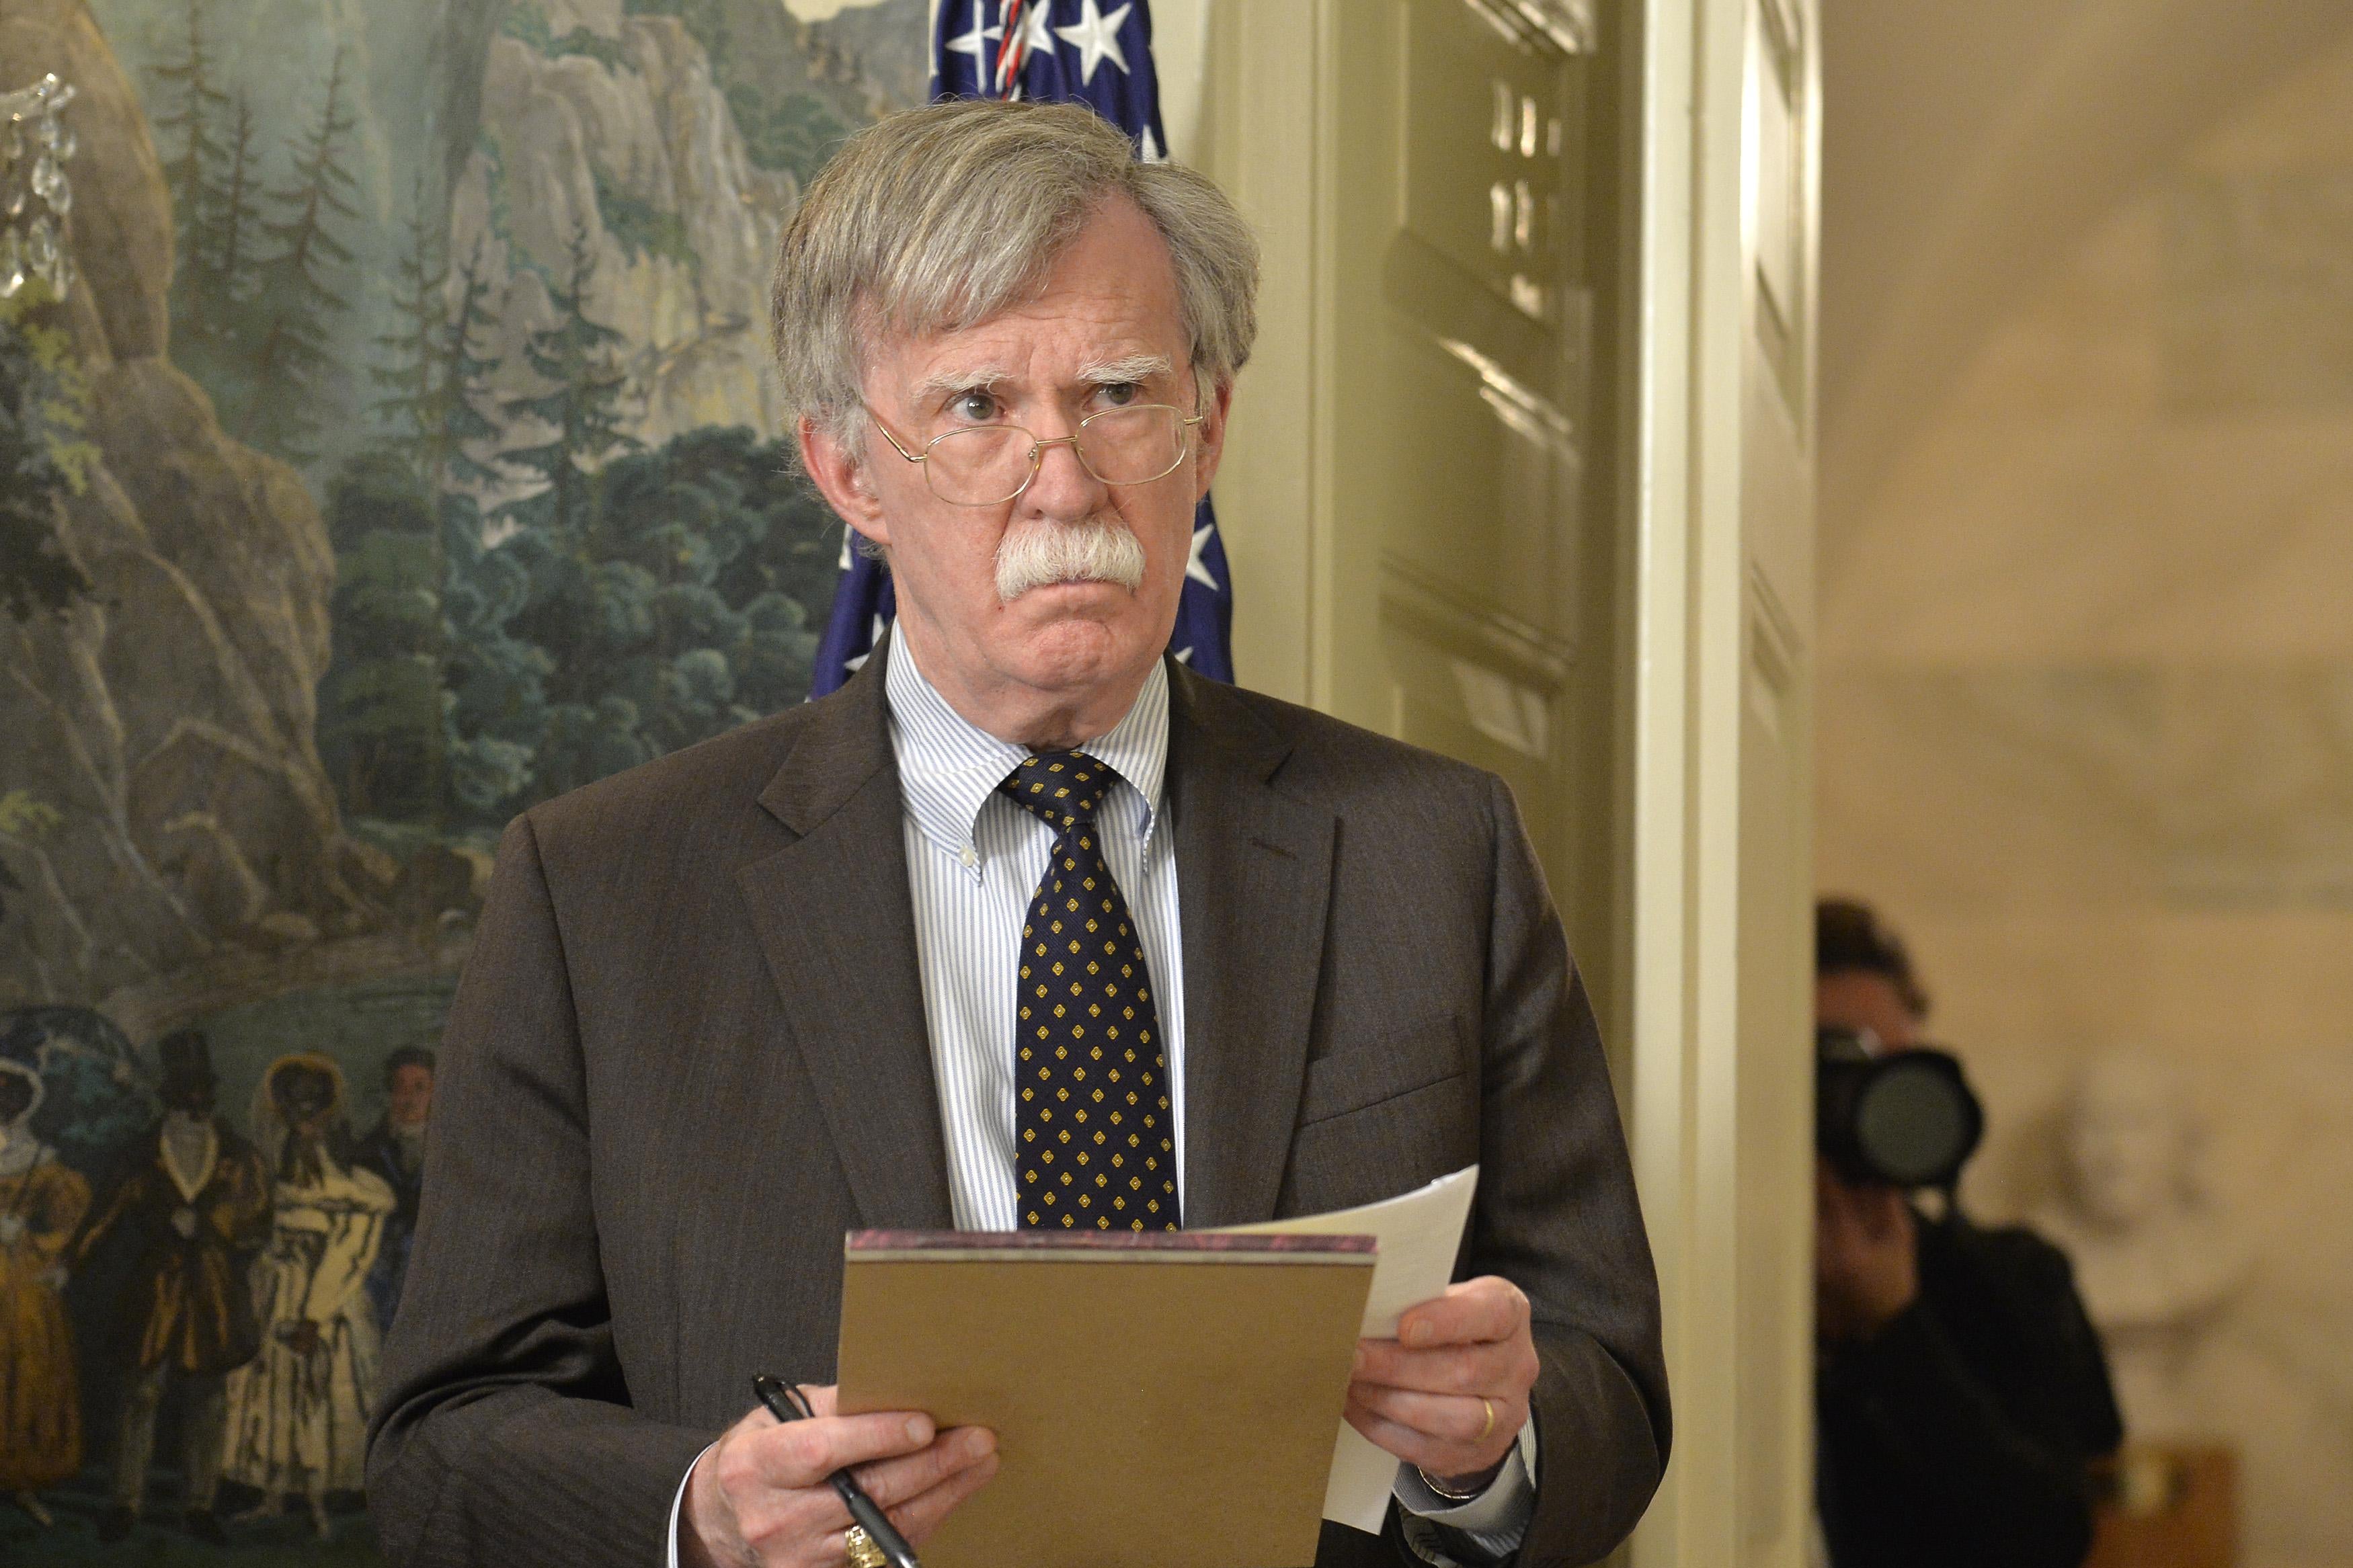 John Bolton holds a legal pad and pen.